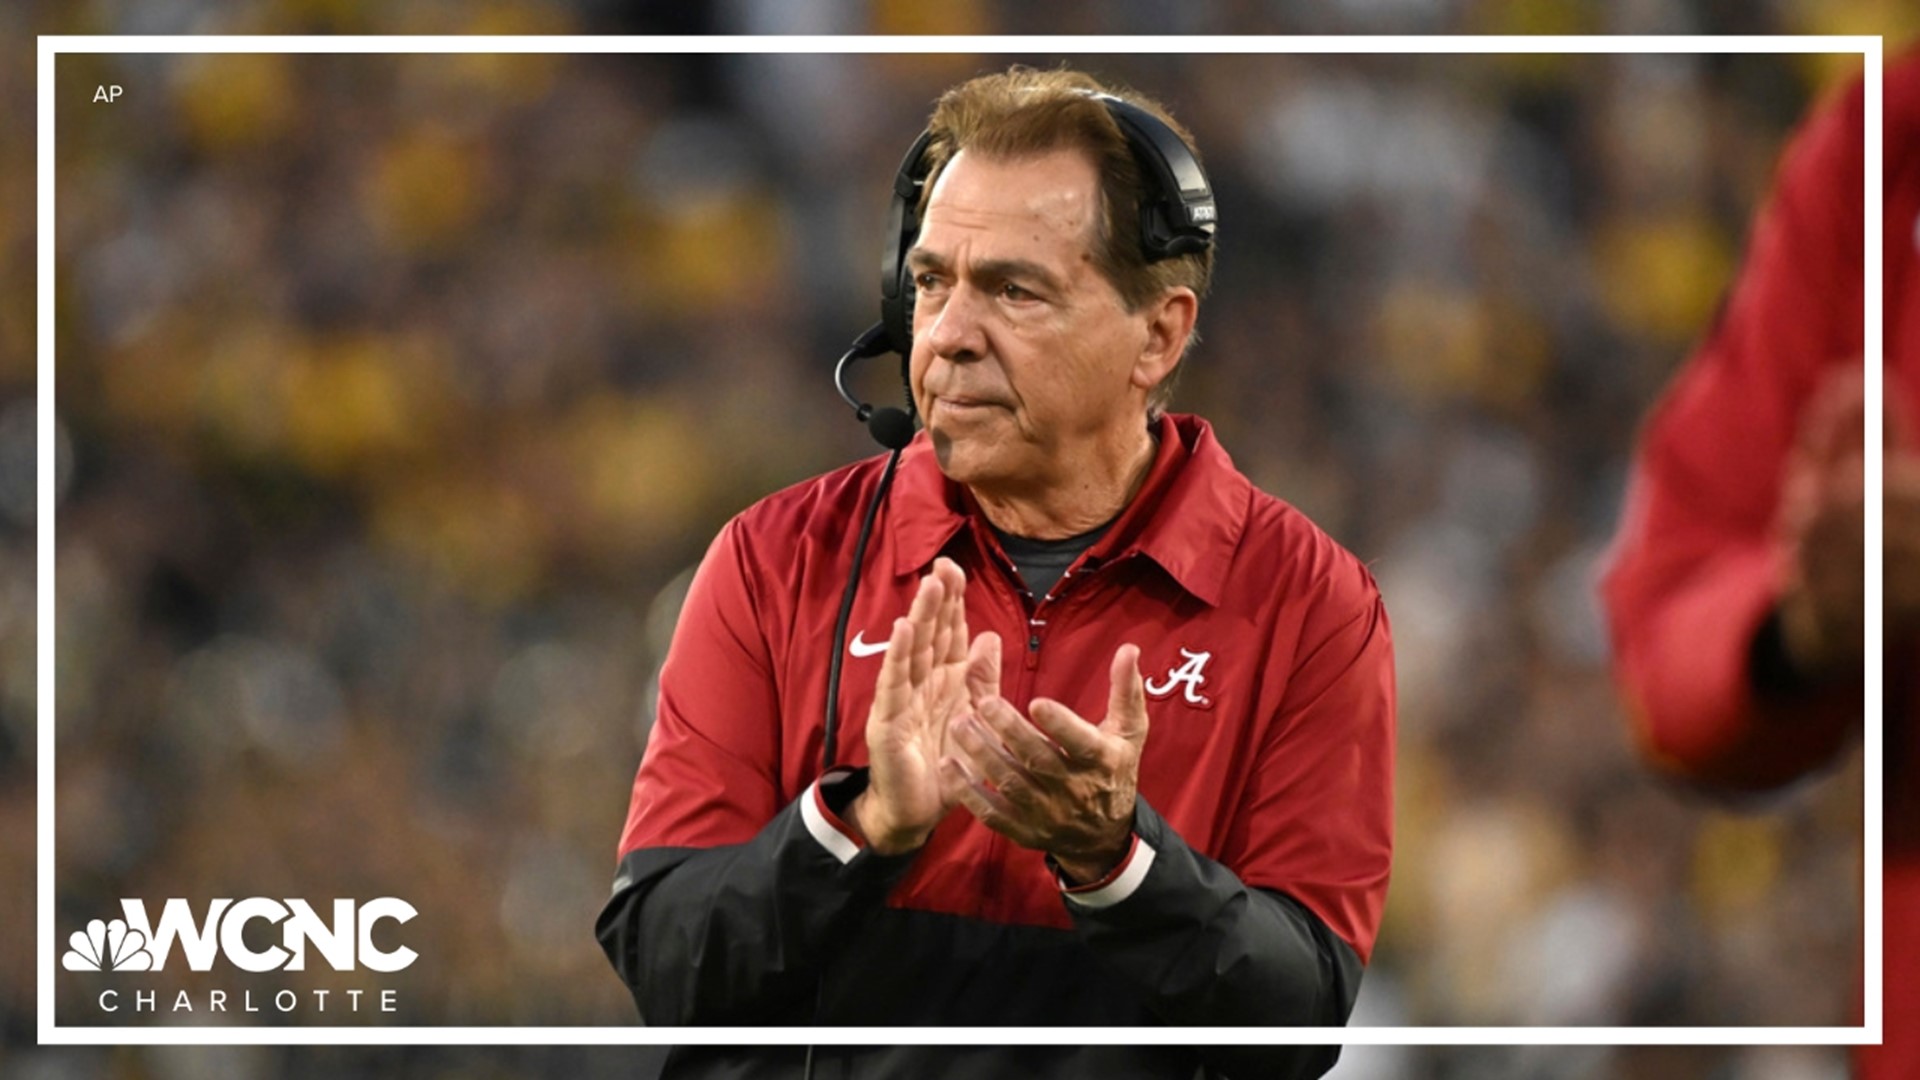 Saban has coached Alabama to six national titles in his 17 seasons there.